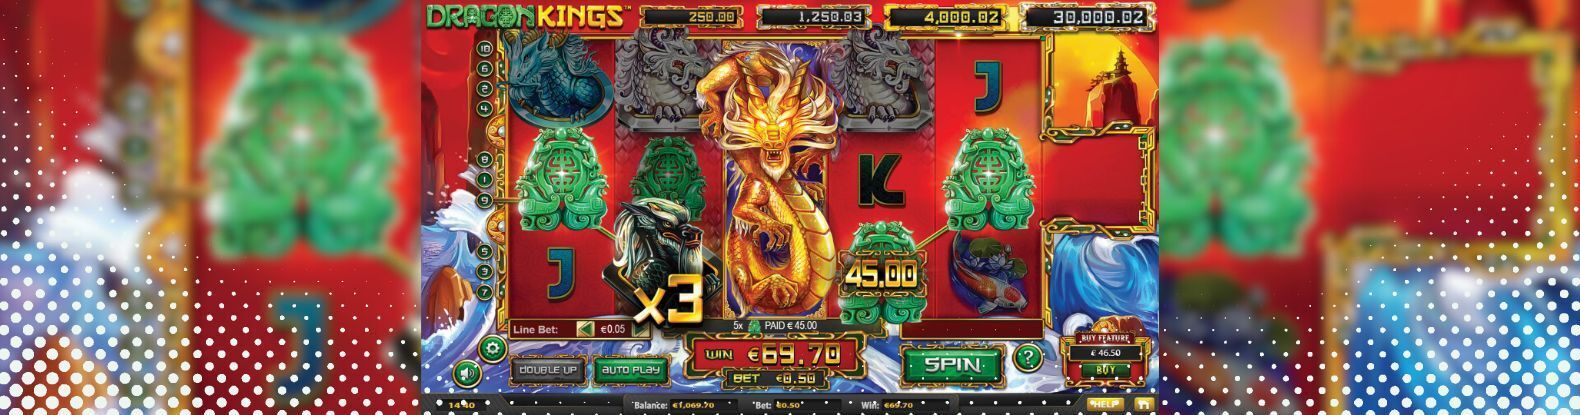 This is a pic of Dragon Kings pokies game by Betsoft